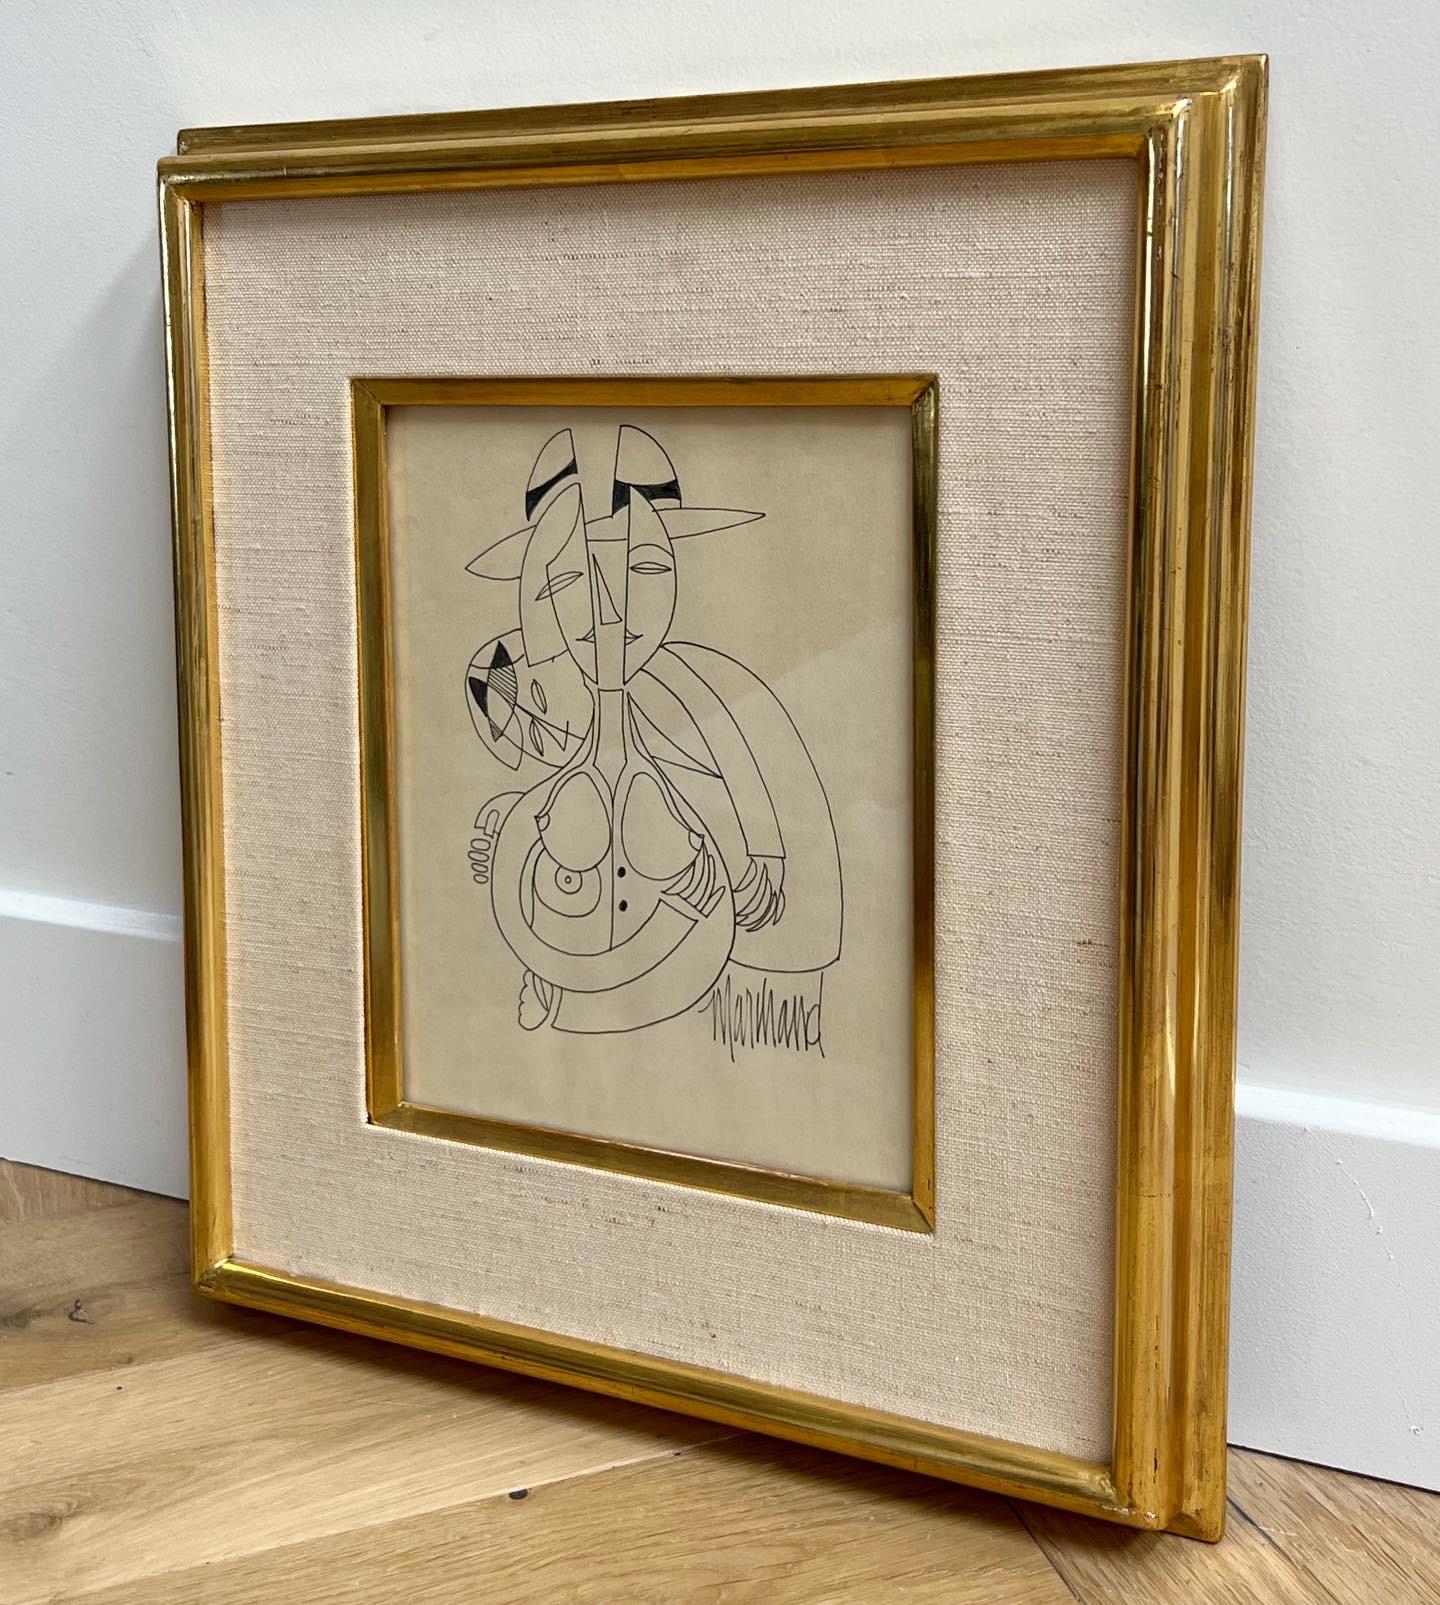 “MAN AND WOMAN”, an original French modernist cubist drawing by Phillipe Marchand, ink on paper, 20th century. Gold leaf frame and linen mount with glass. Signed on lower right. Ready to hang. Pick up in central west Los Angeles or worldwide